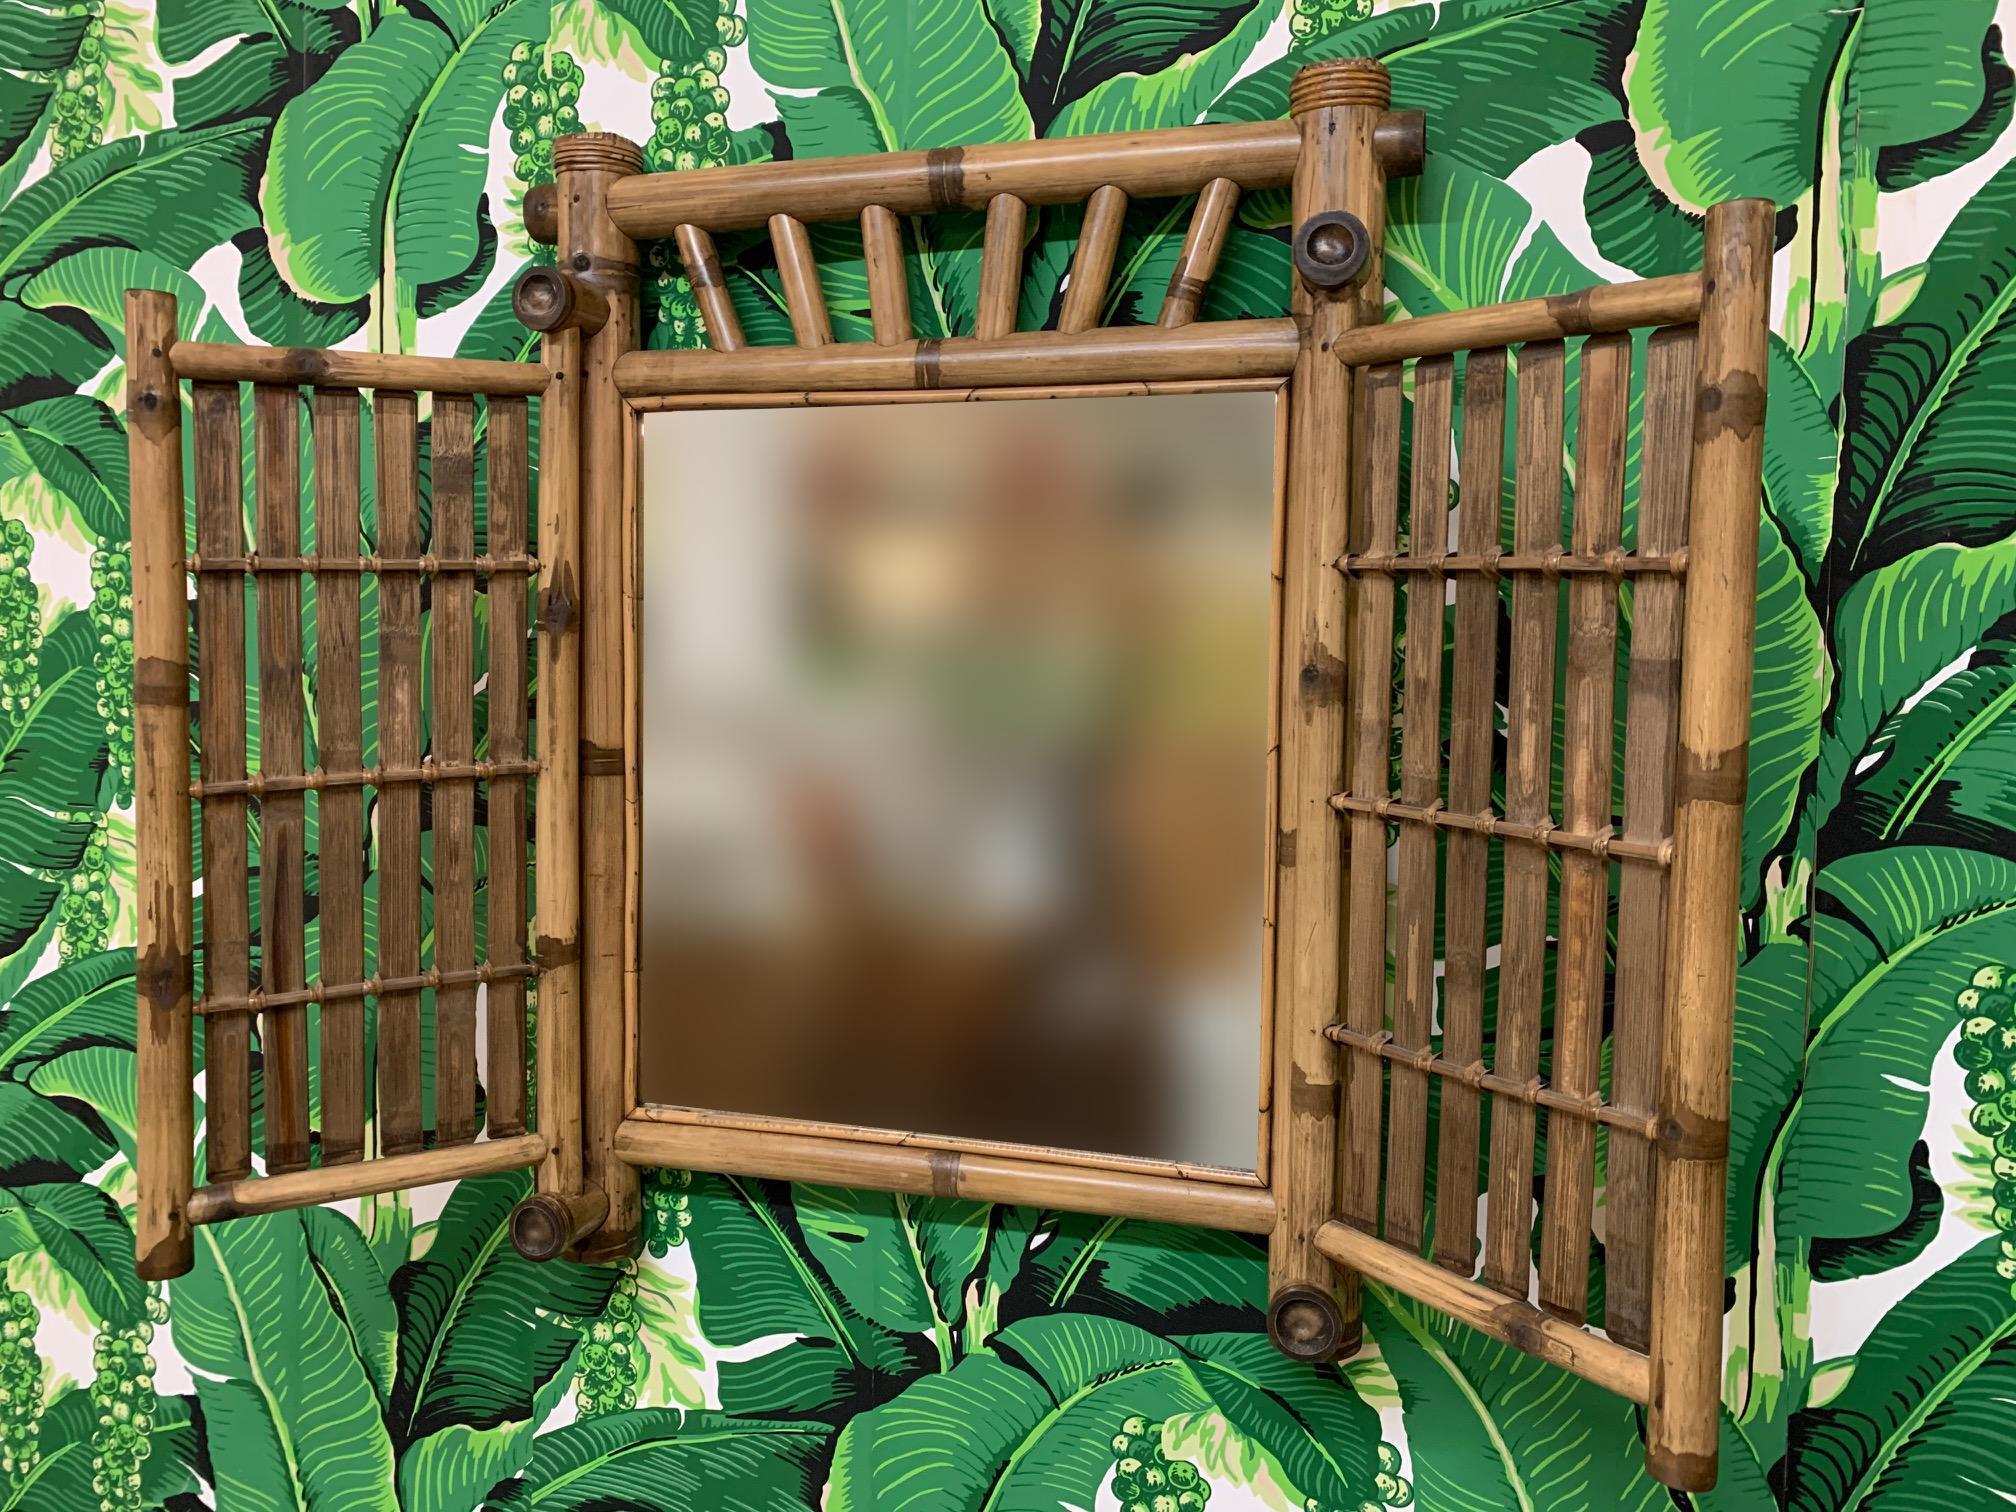 Tiki style bamboo and rattan mirror features double door sides that can swing closed to hide the mirror. Mirror can be mounted on the wall or it can stand on a dresser or desk as a vanity mirror. A perfect way to add some Polynesian island style to